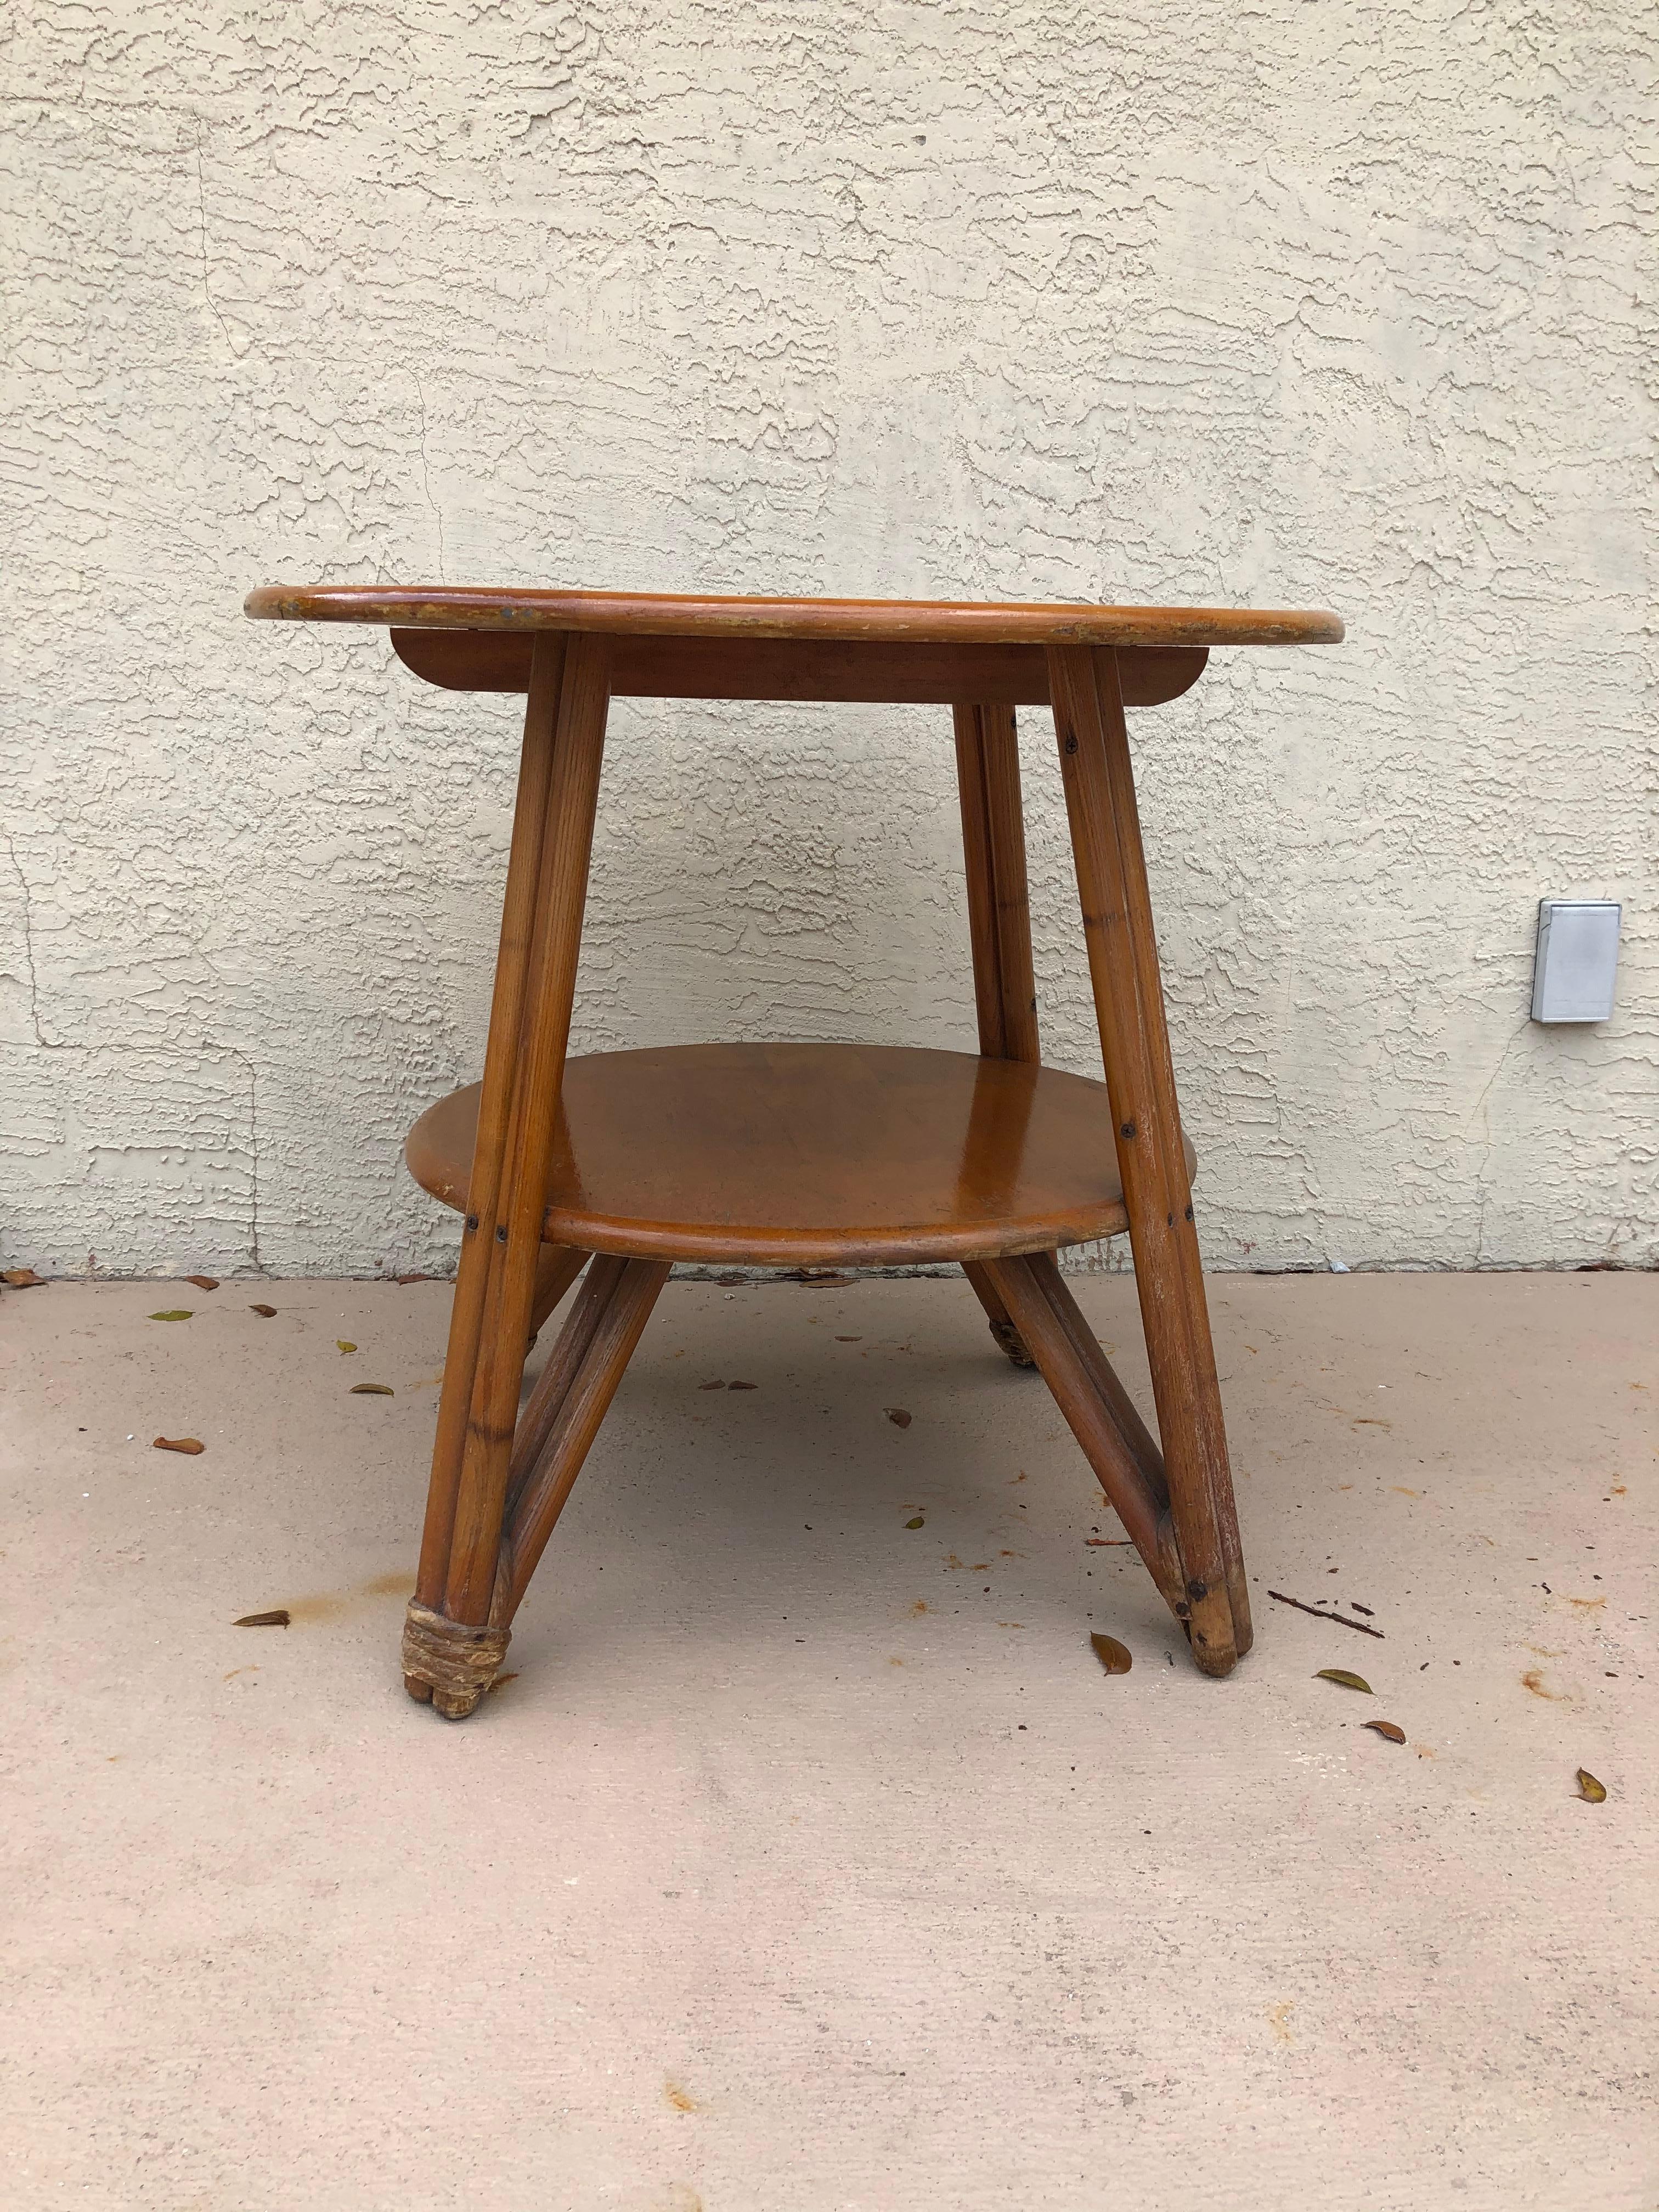 Rare rattan, bamboo and wood Heywood Wakefield game table. Probably from the 1960s. Can use for chess or checkers or whatever you desire. I could not find another example online. Condition overall is good except one bottom leg is missing wrapped